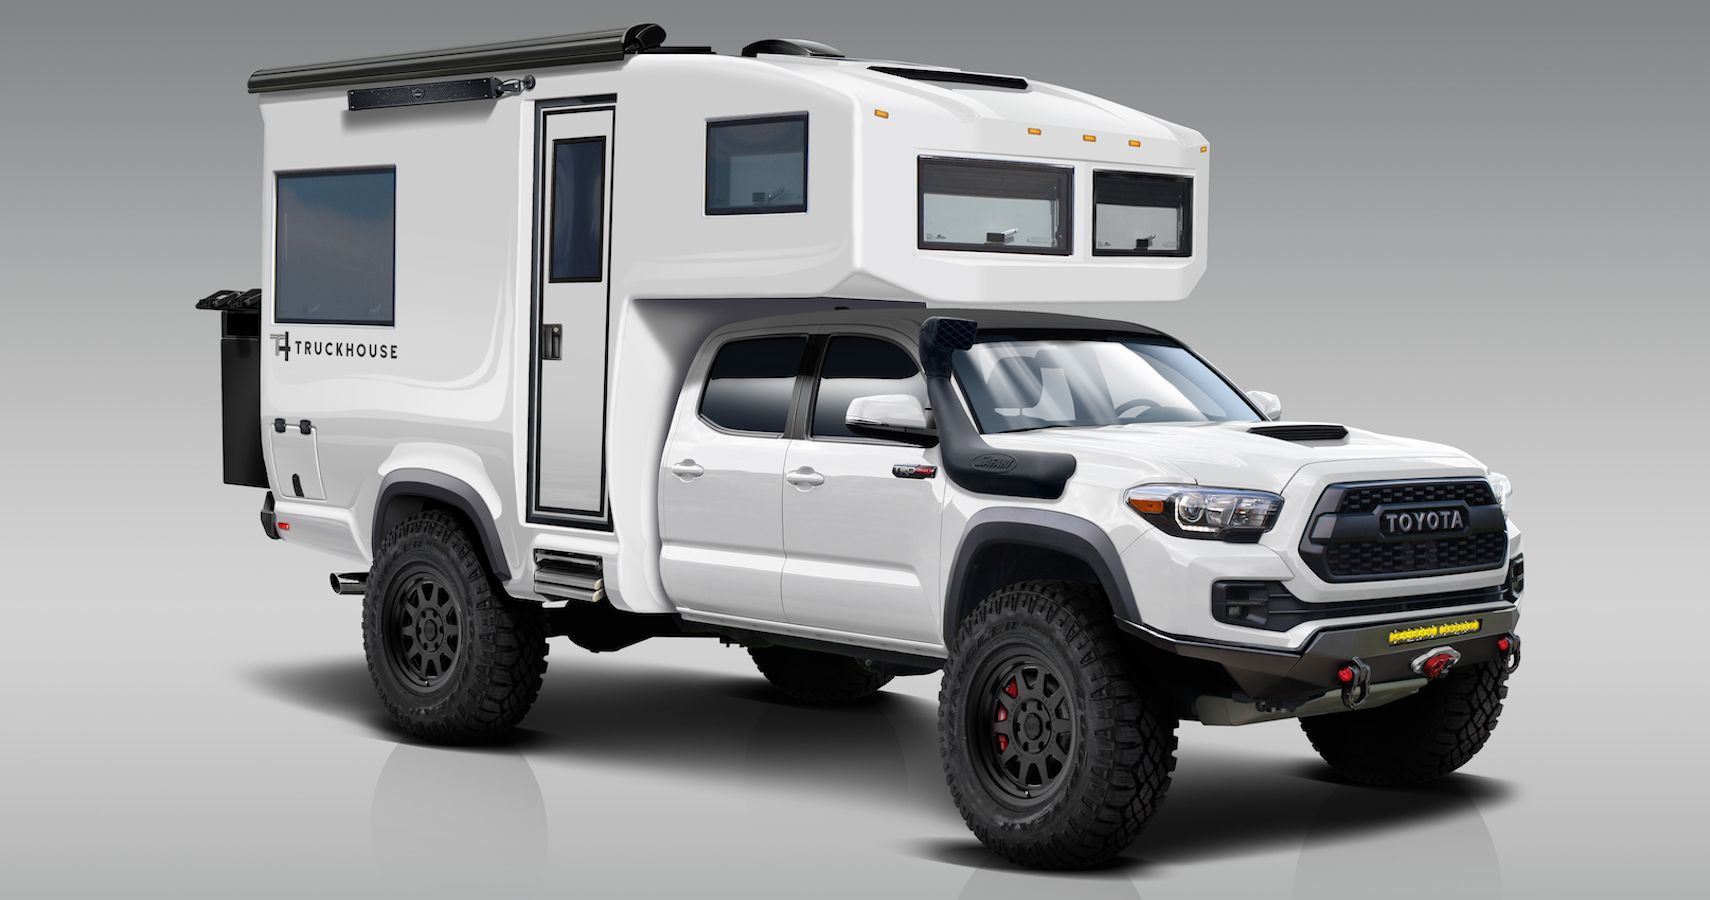 This Company Will Turn Your Toyota Into The Ultimate Glamping Camper